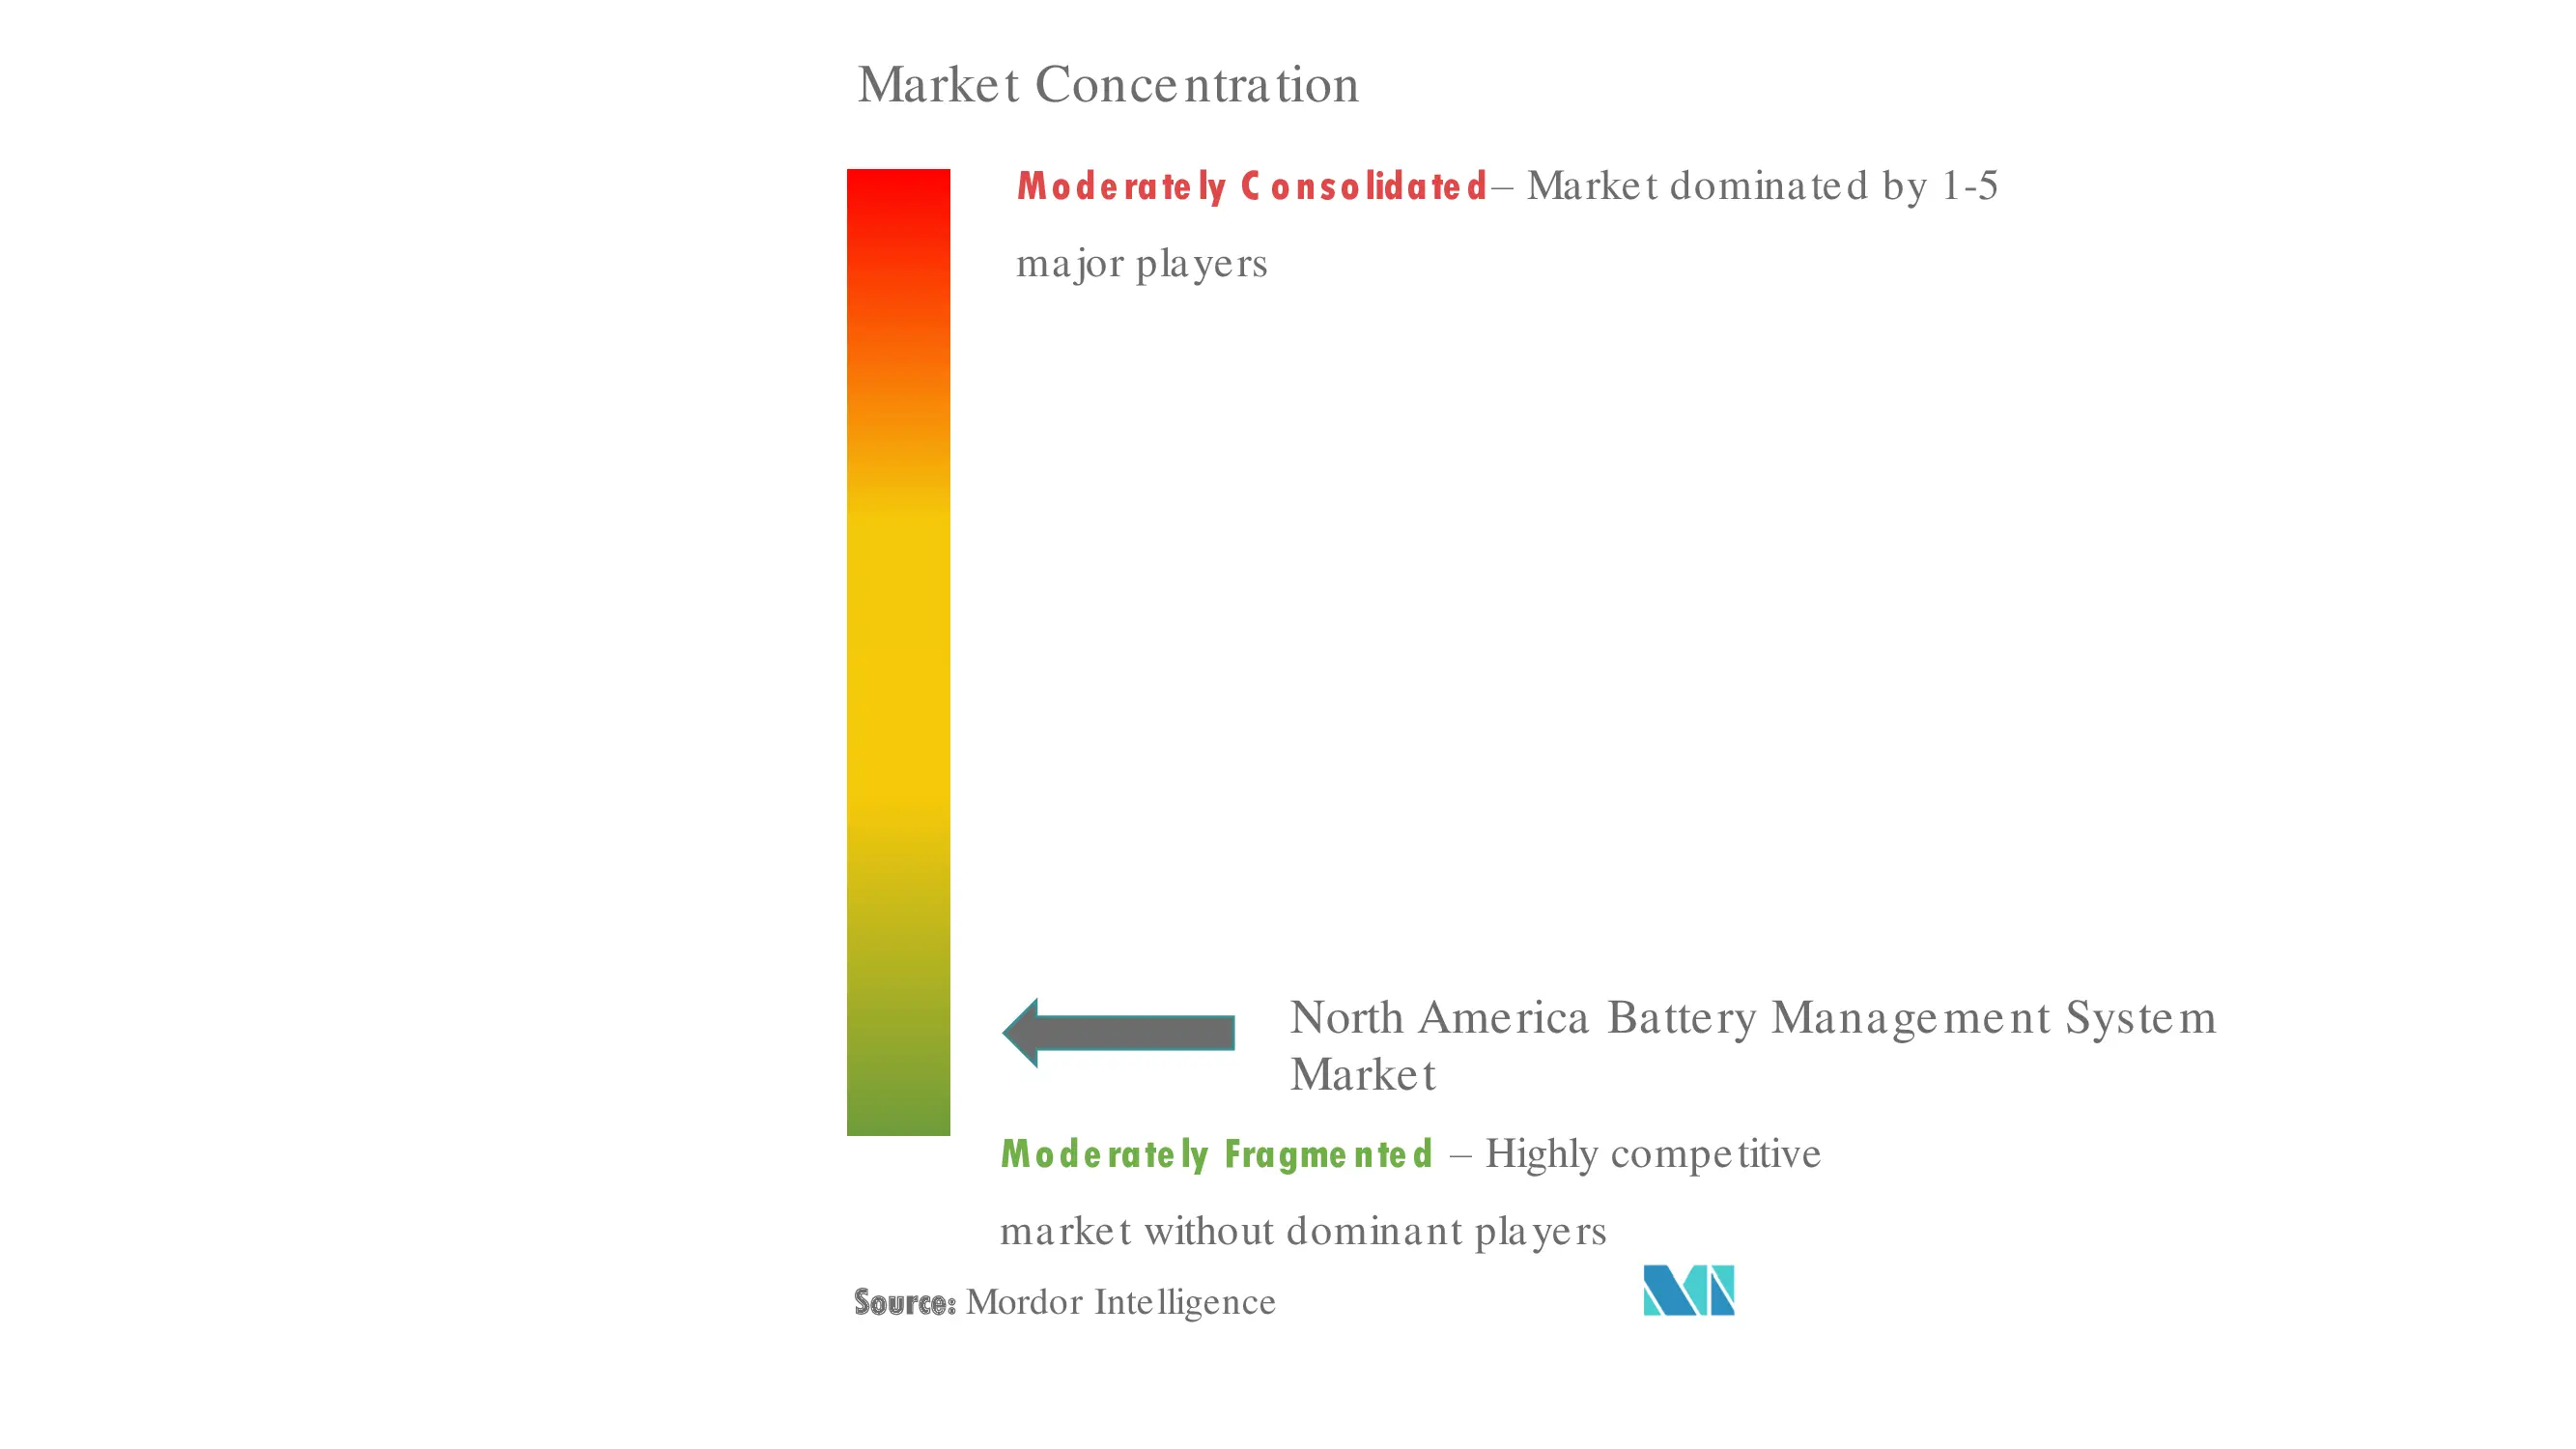 North America Battery Management System Market Concentration